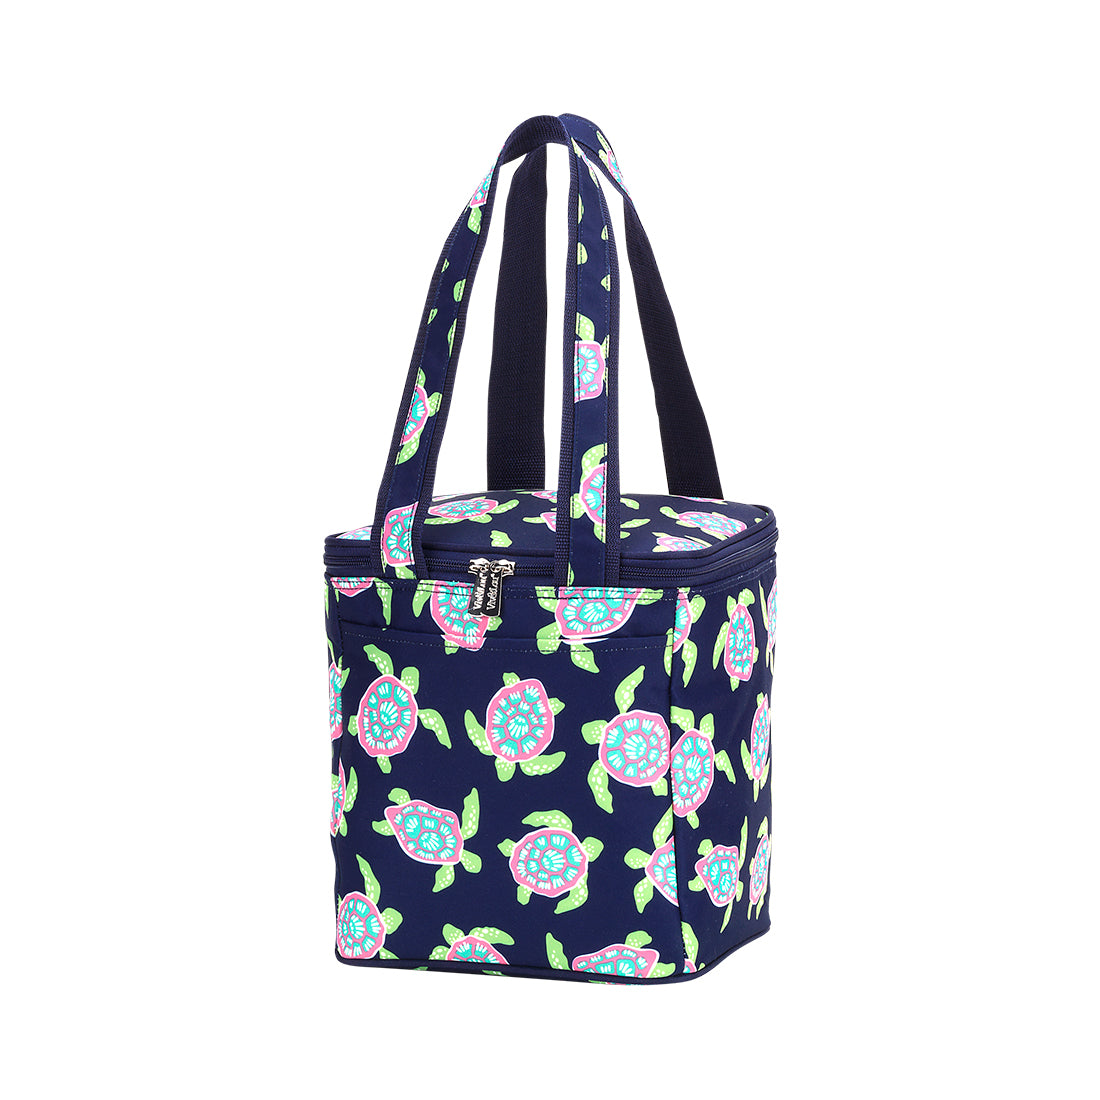 Turtle Bay Cooler Tote